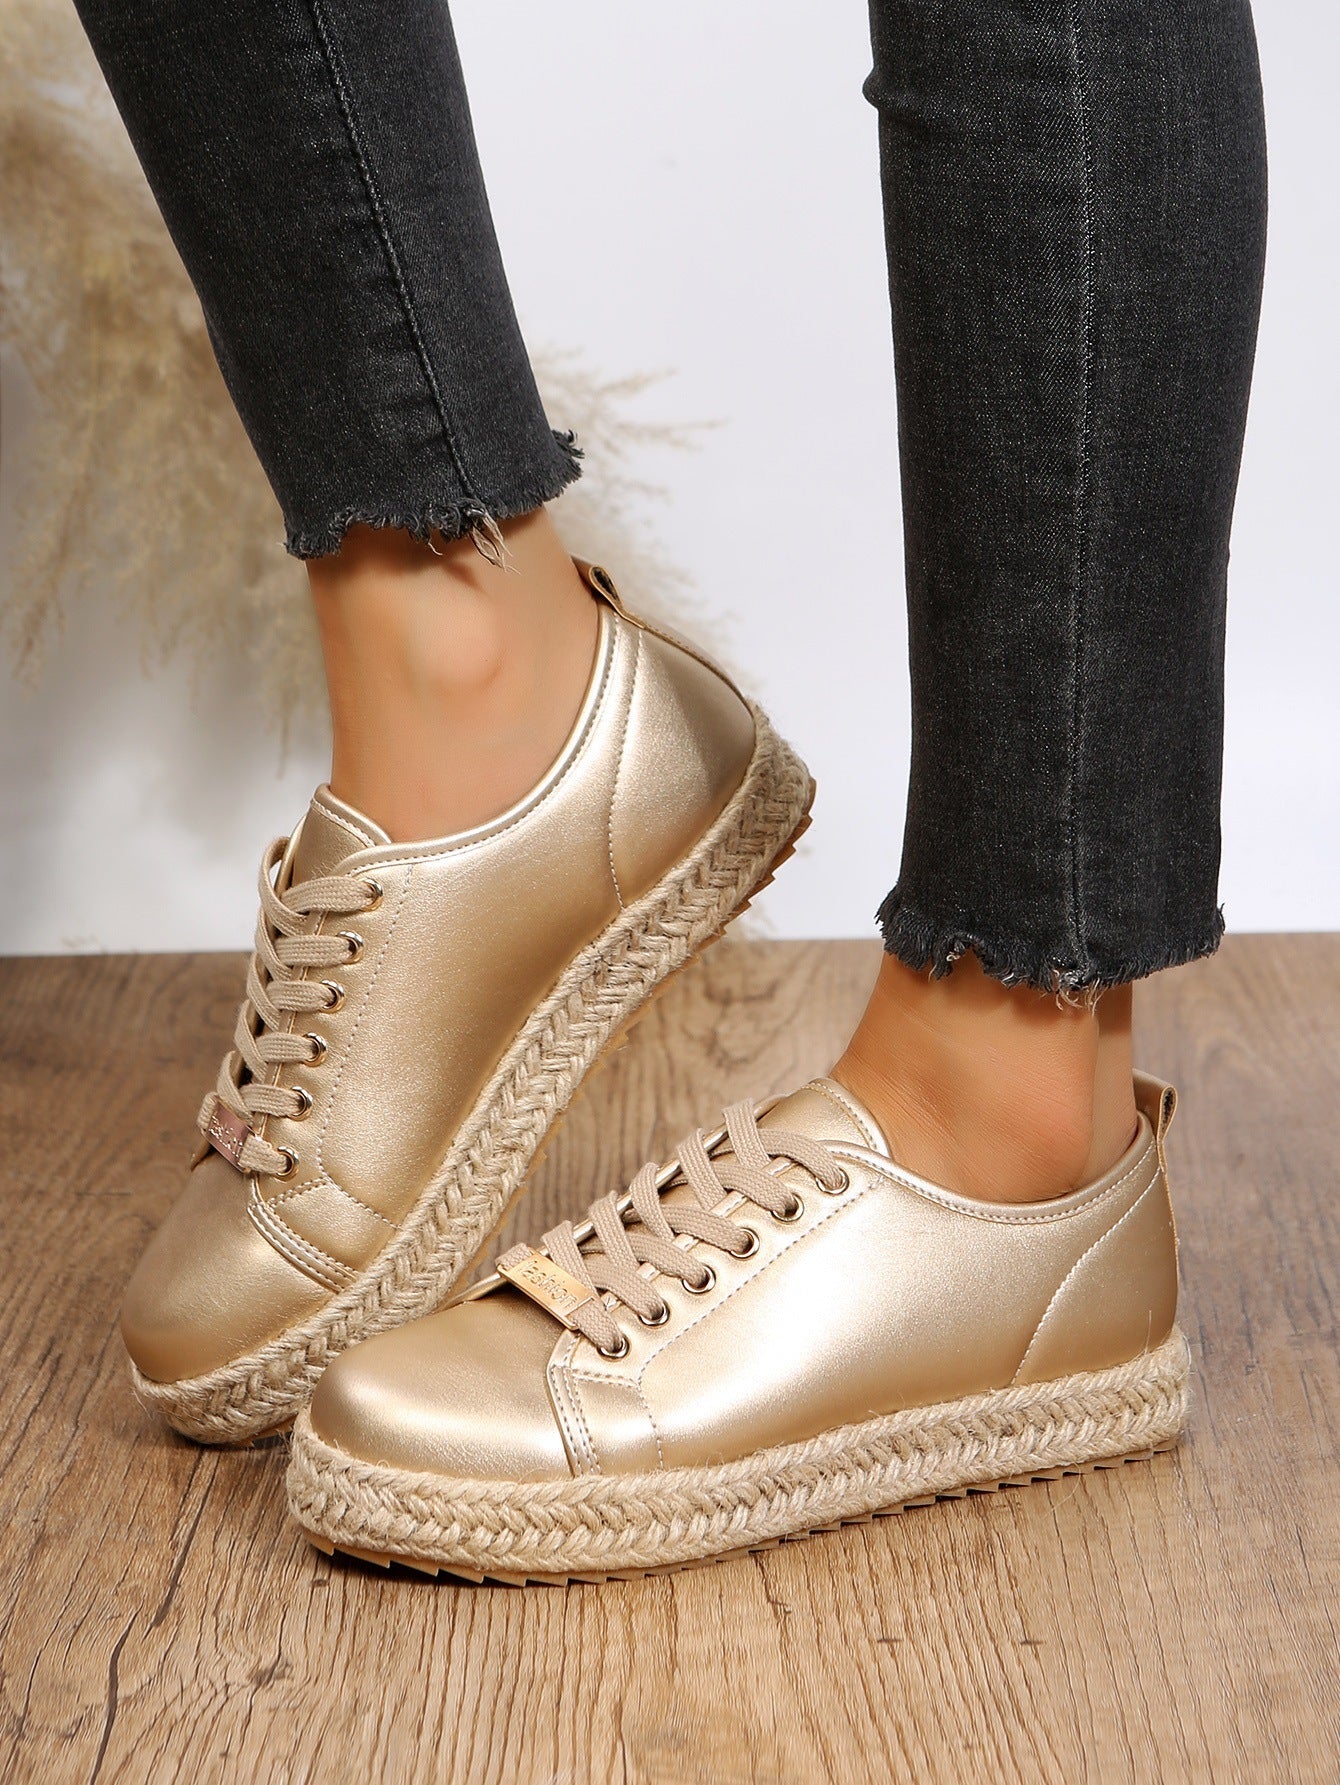 Gold twine braided bottom lace-up sneakers